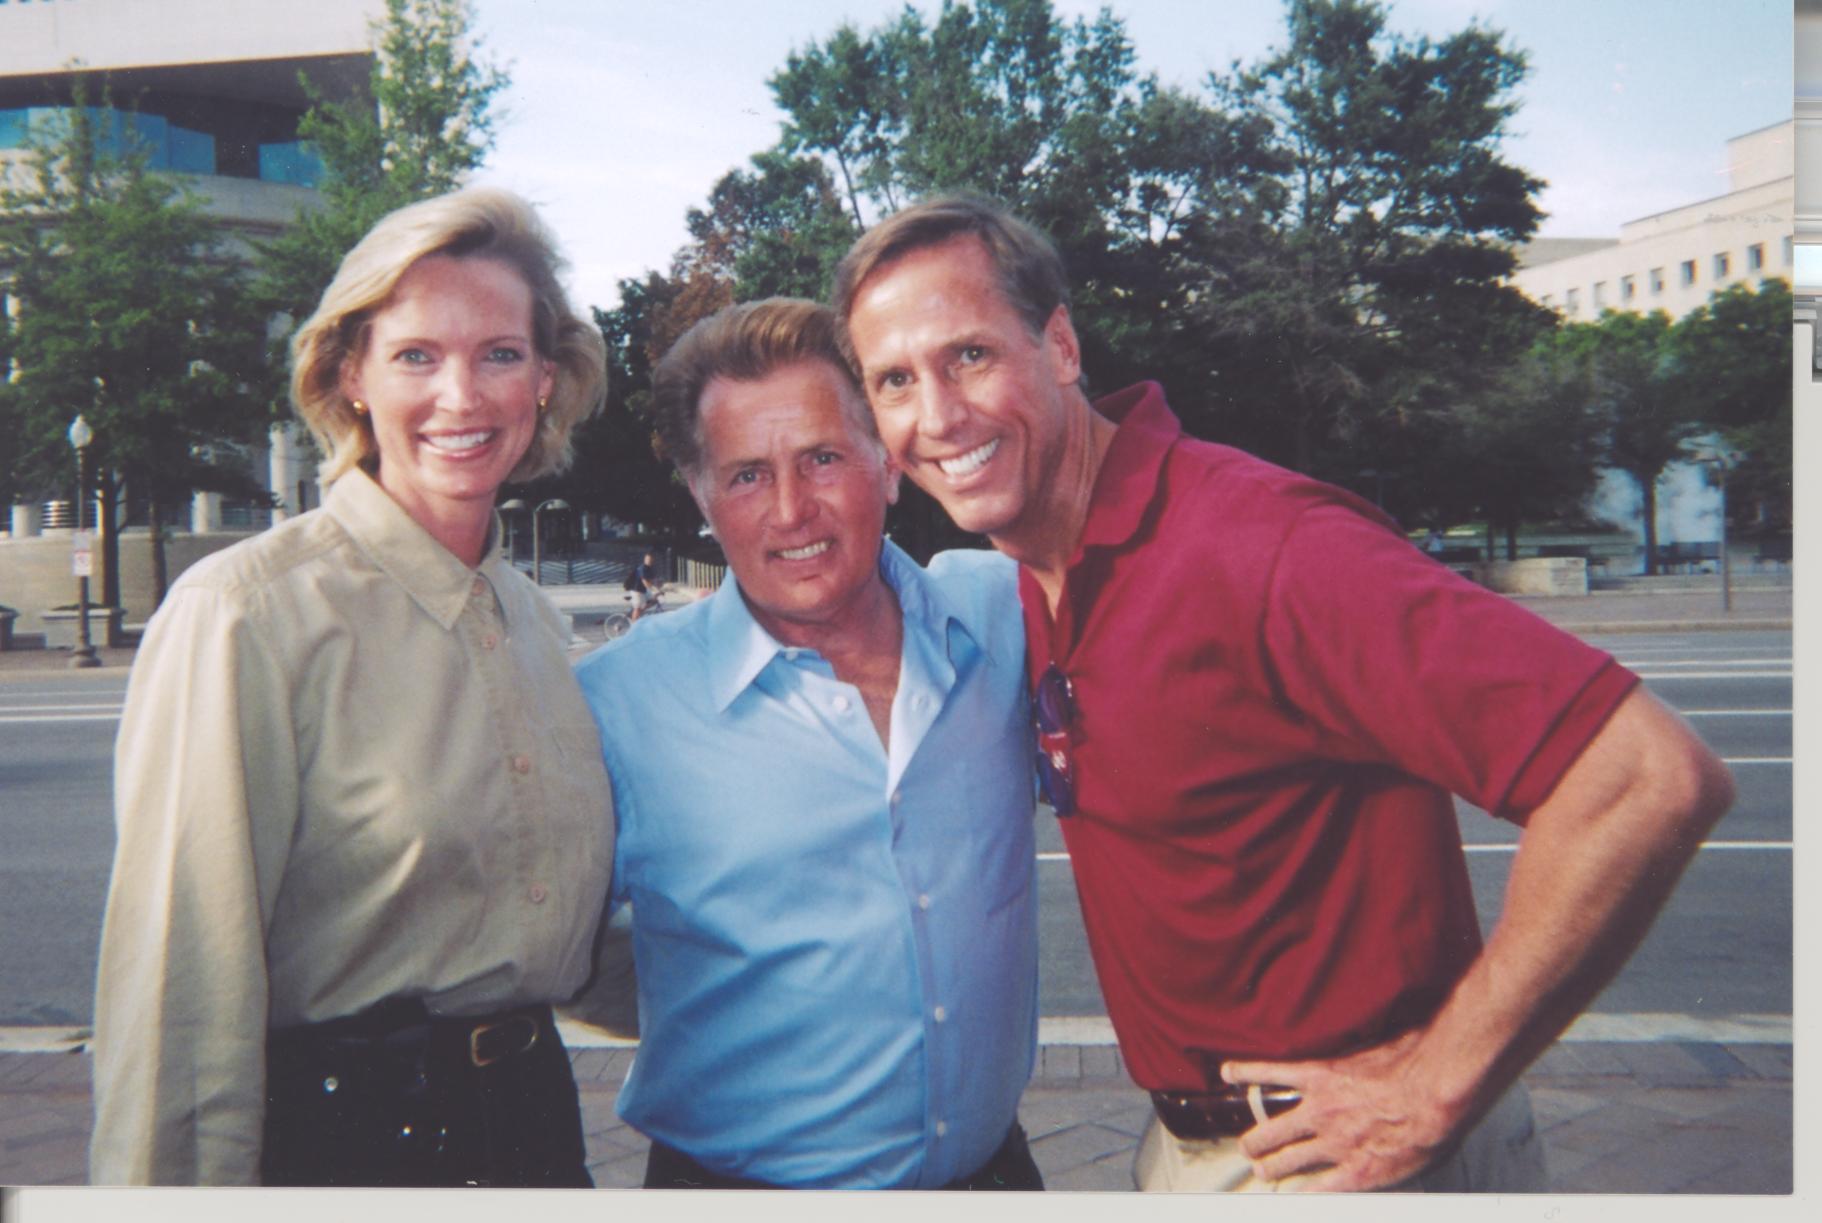 On the West Wing set with Martin Sheen, and a friend David